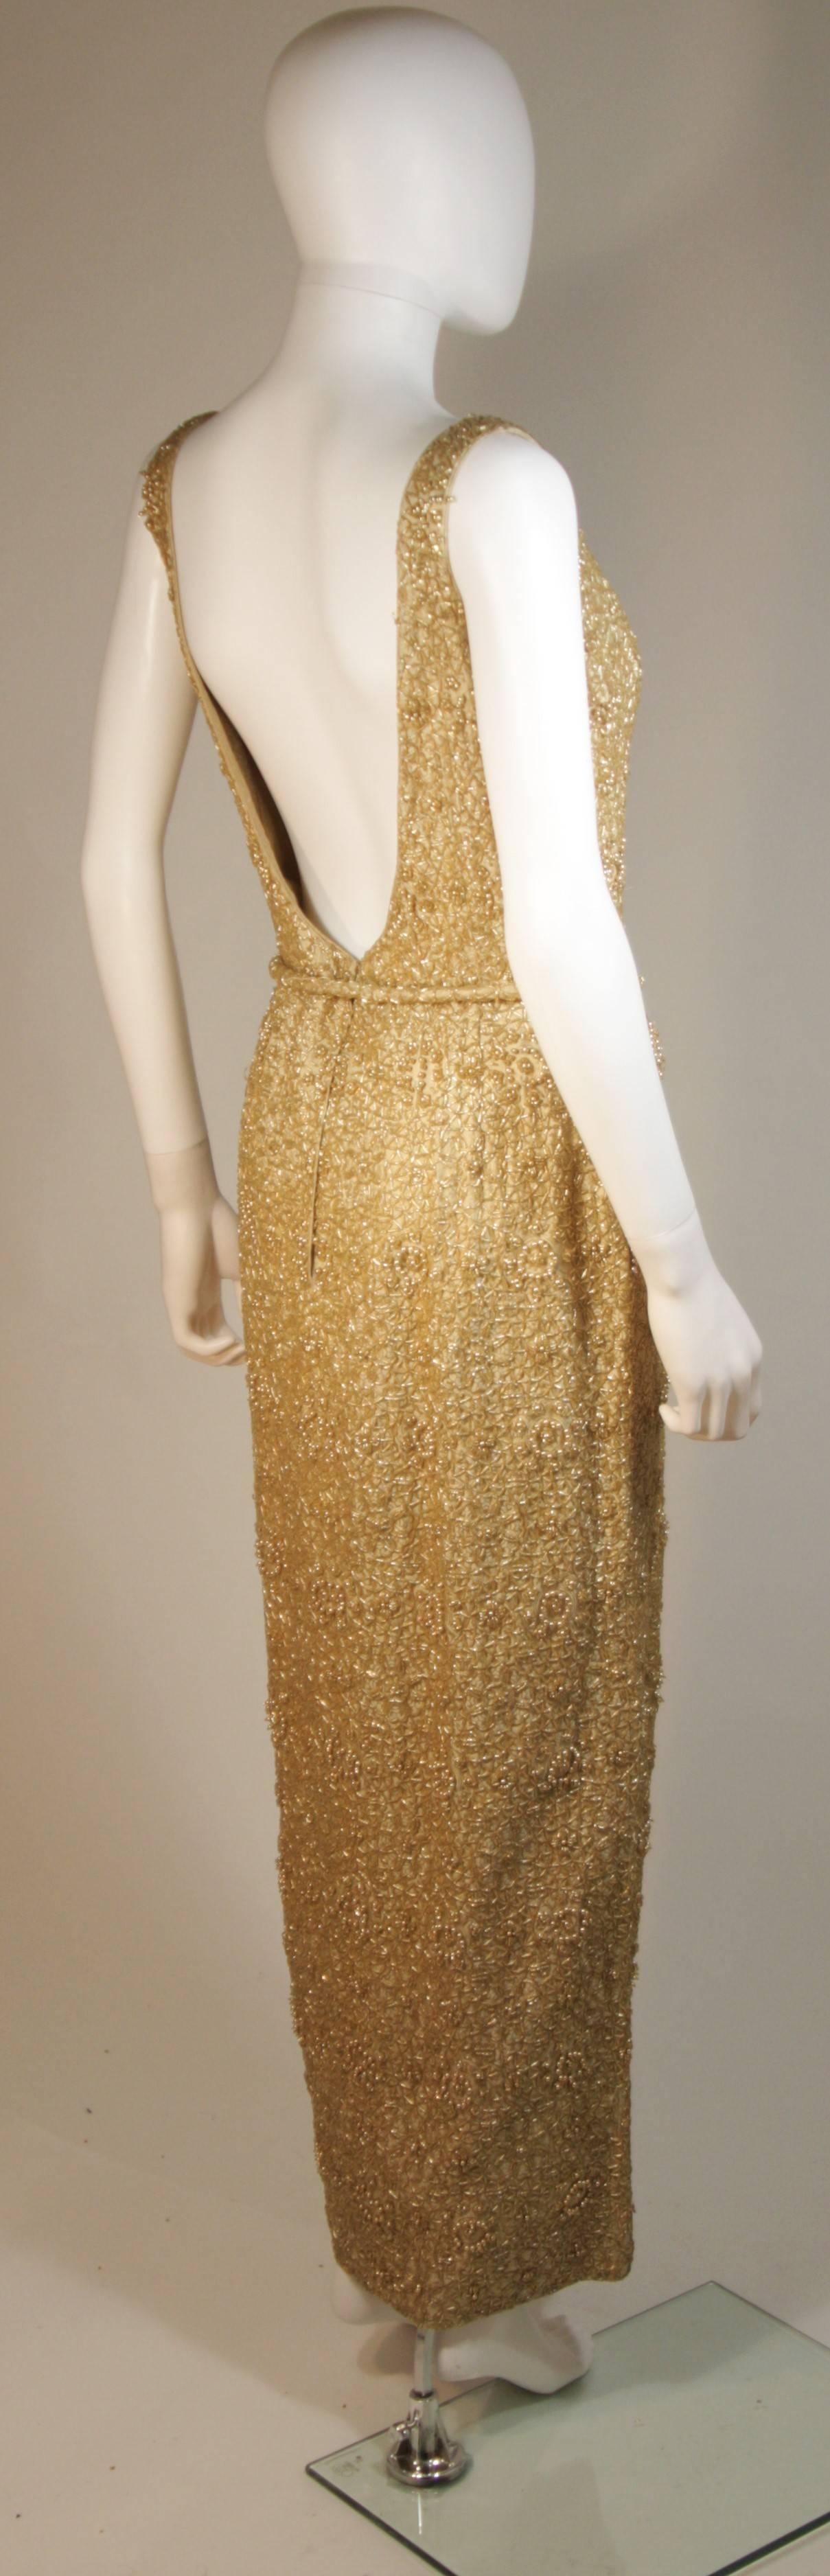 HAUTE COUTURE INT'L Gold Heavily Beaded Gown with Belt Size Large  In Excellent Condition For Sale In Los Angeles, CA